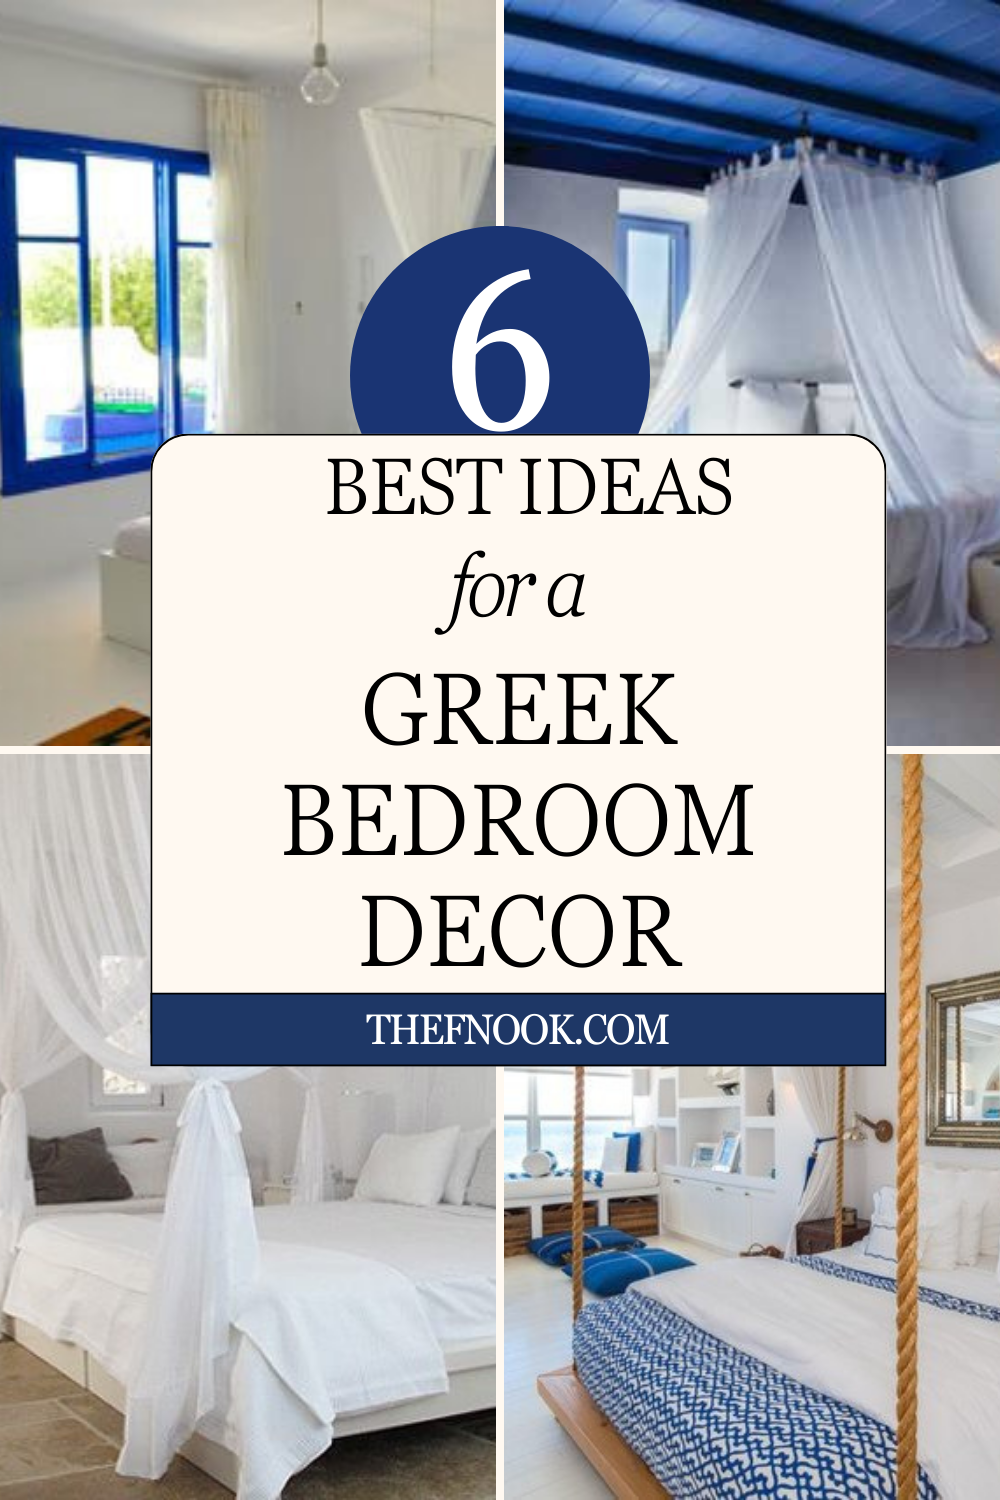 6 Best Ideas to Design your Bedroom in a Greek Style